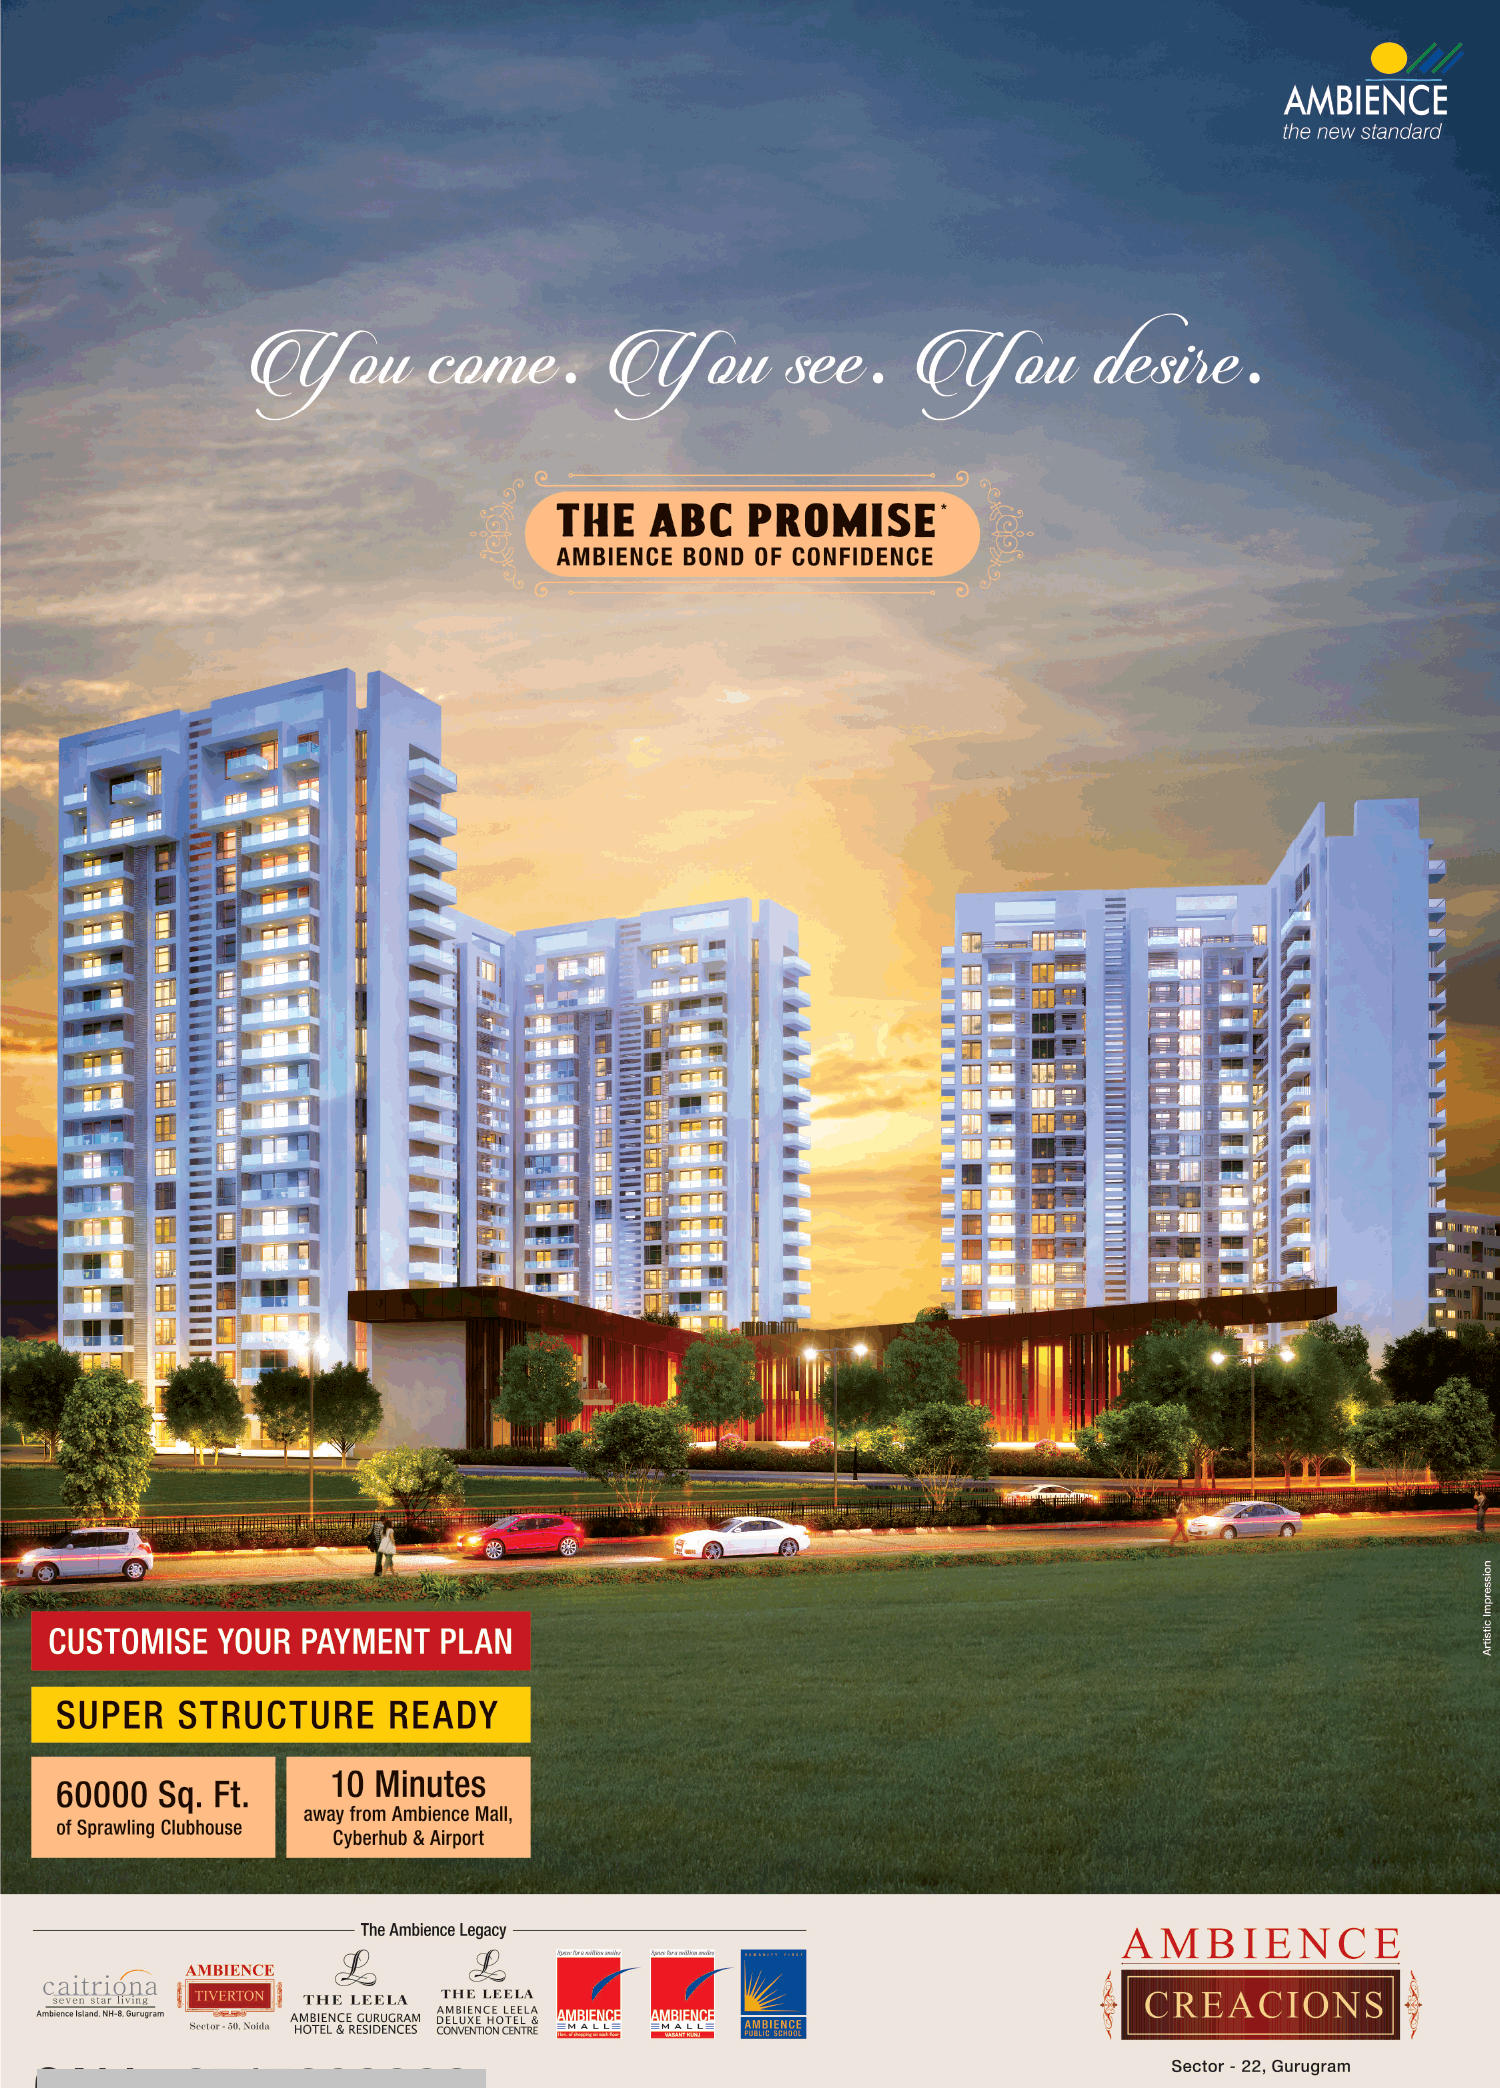 Super structure ready at Ambience Creacions in Gurgaon